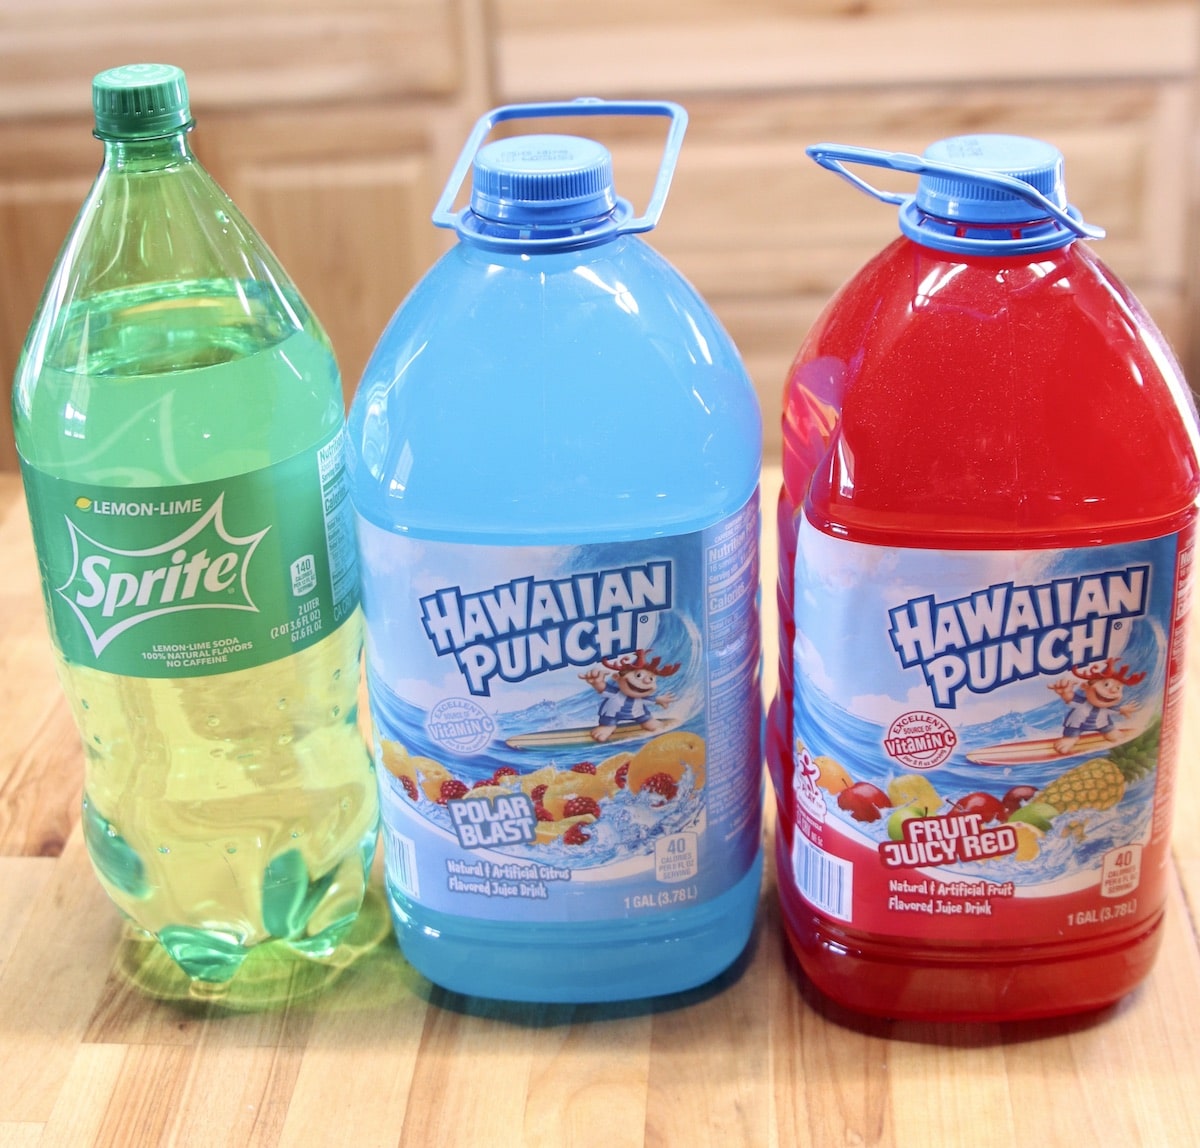 Sprite bottle with blue and red Hawaiian punch.